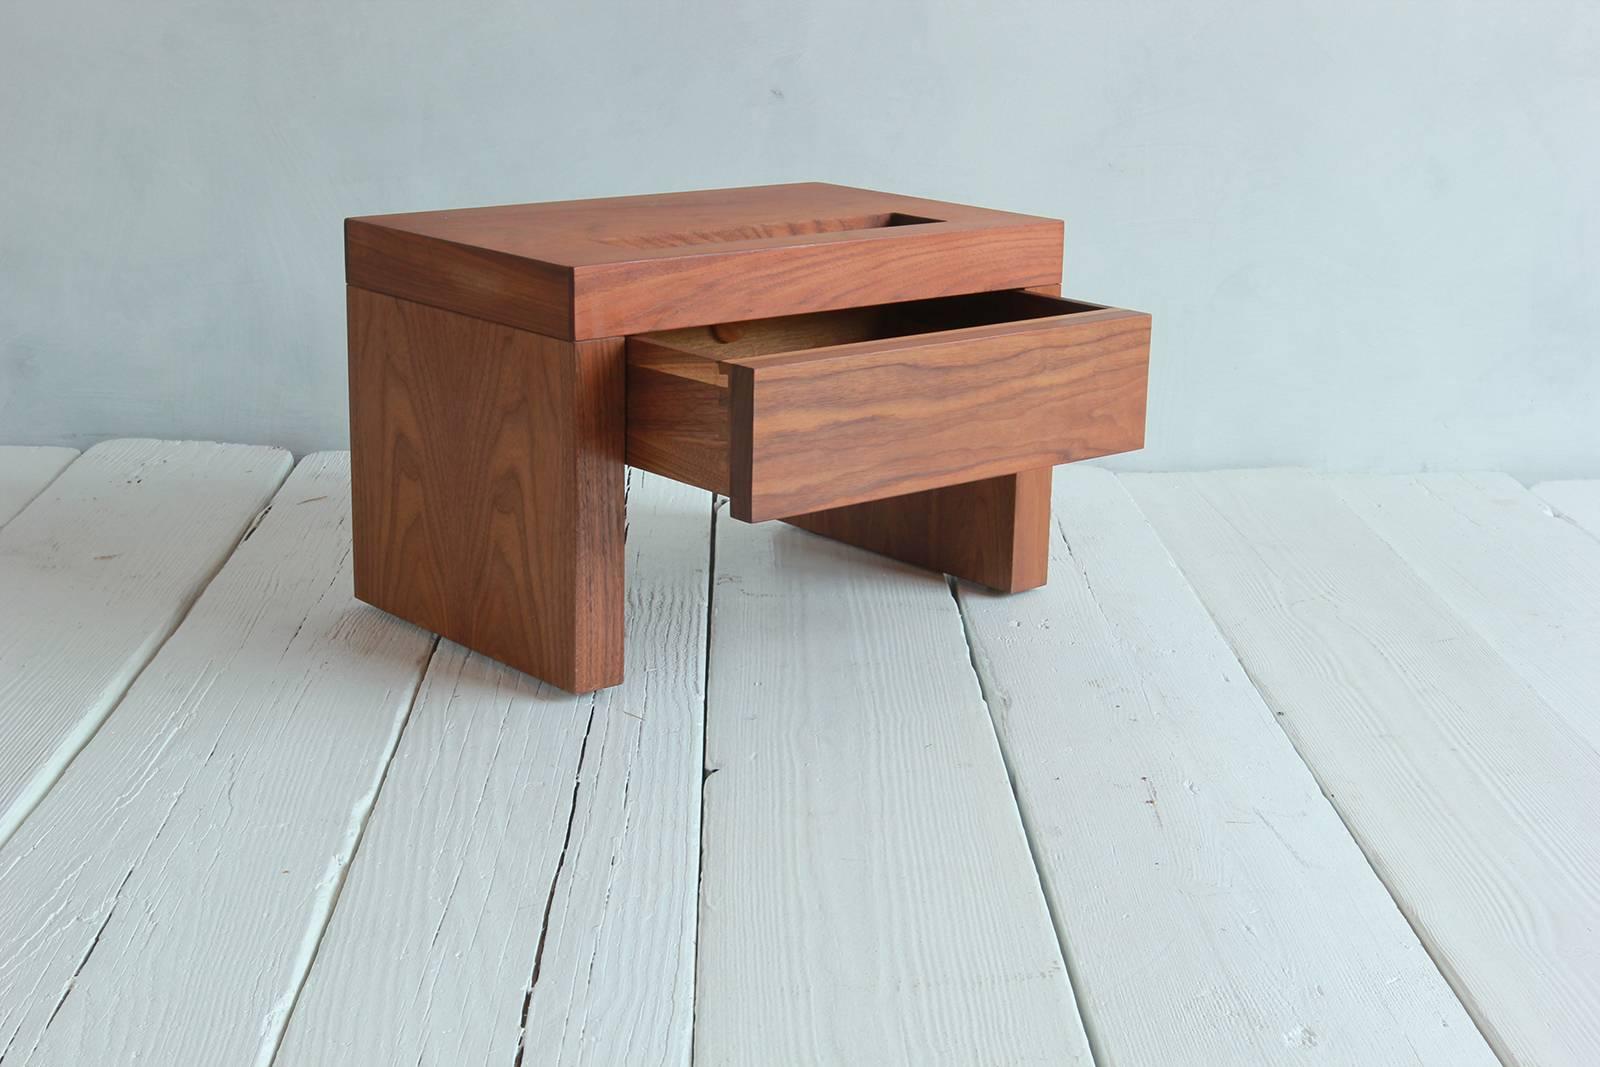 Late 20th Century Walnut Side Table with Cut-Out Niche and Hidden Single Drawer